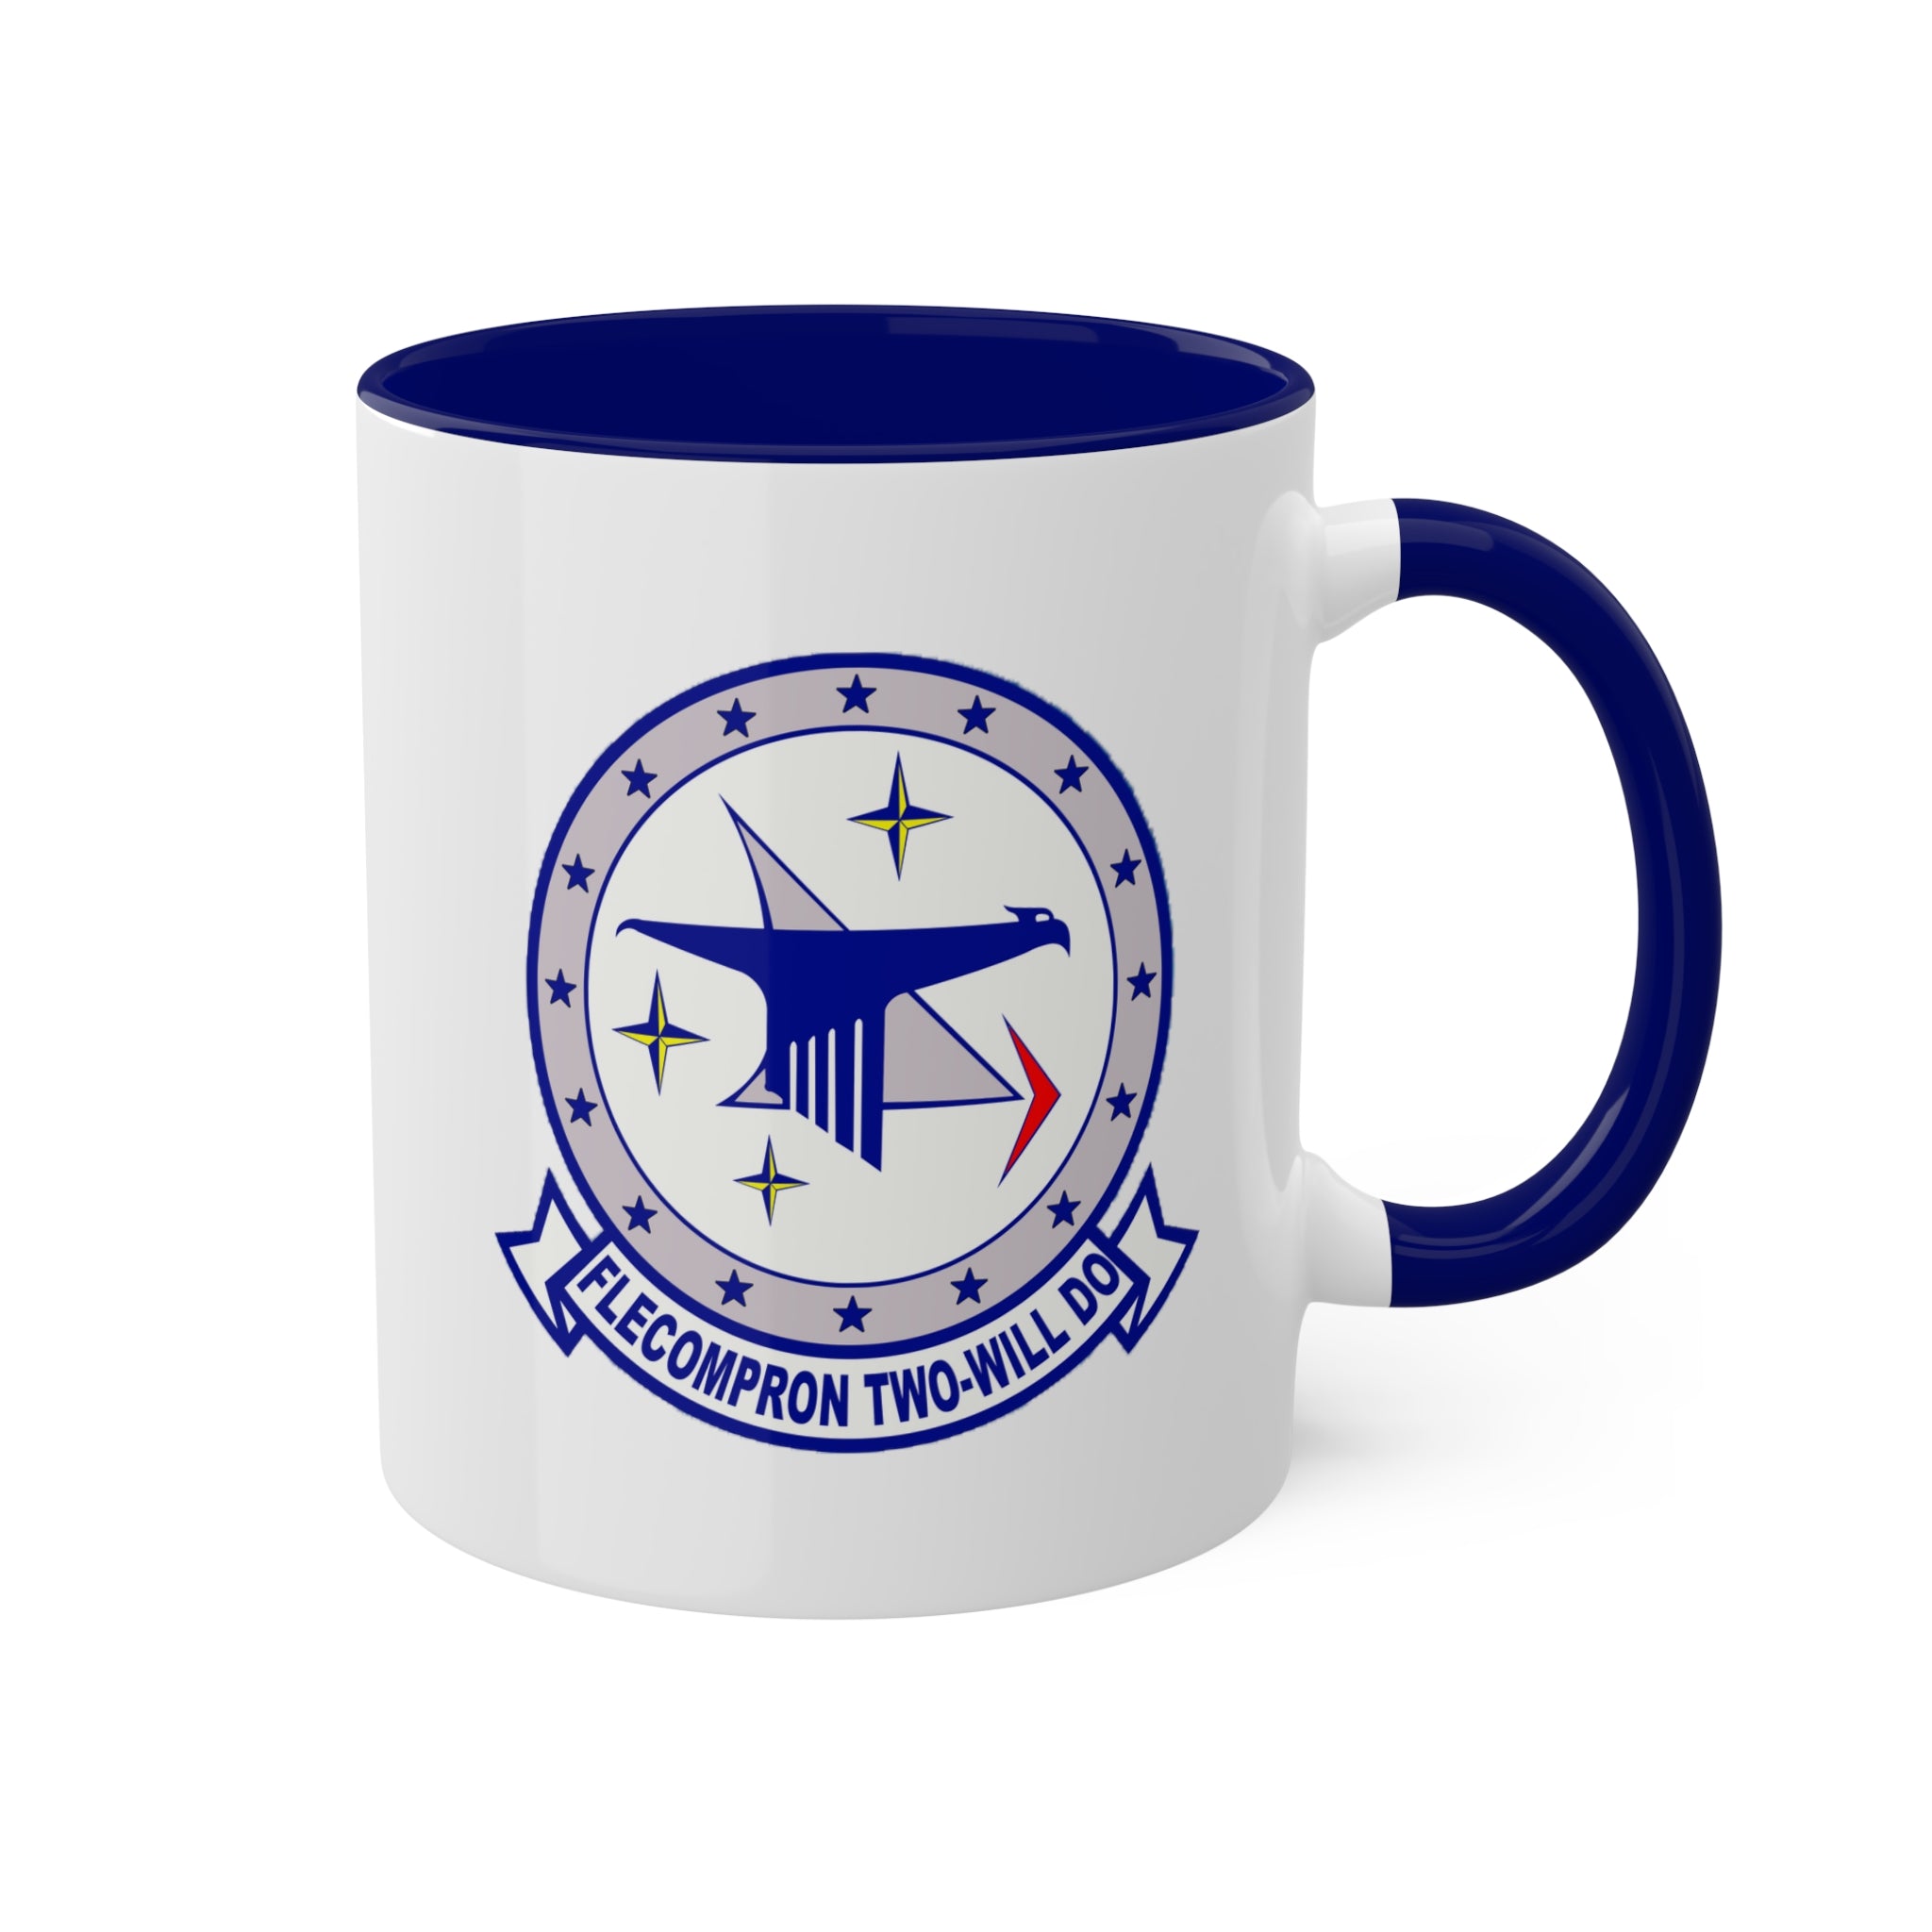 VC-2 "Blue Falcons" AE2 10oz. Coffee Mug, Navy Composite Squadron with the Enlisted Aviation Electricians Mate Second Class